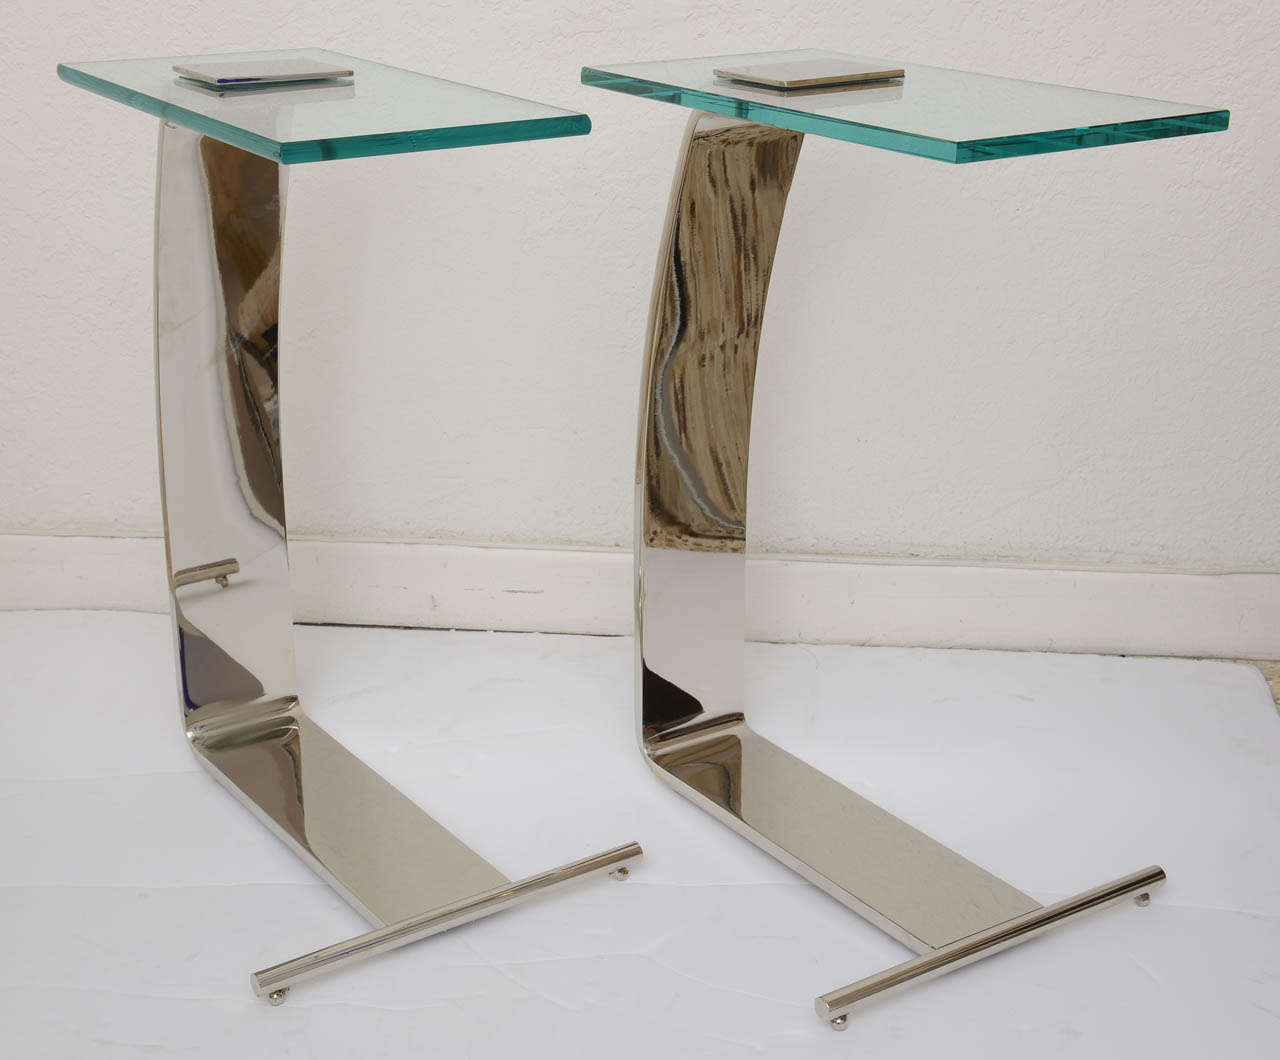 20th Century Pair of Side Tables Nickel-Plated and Glass